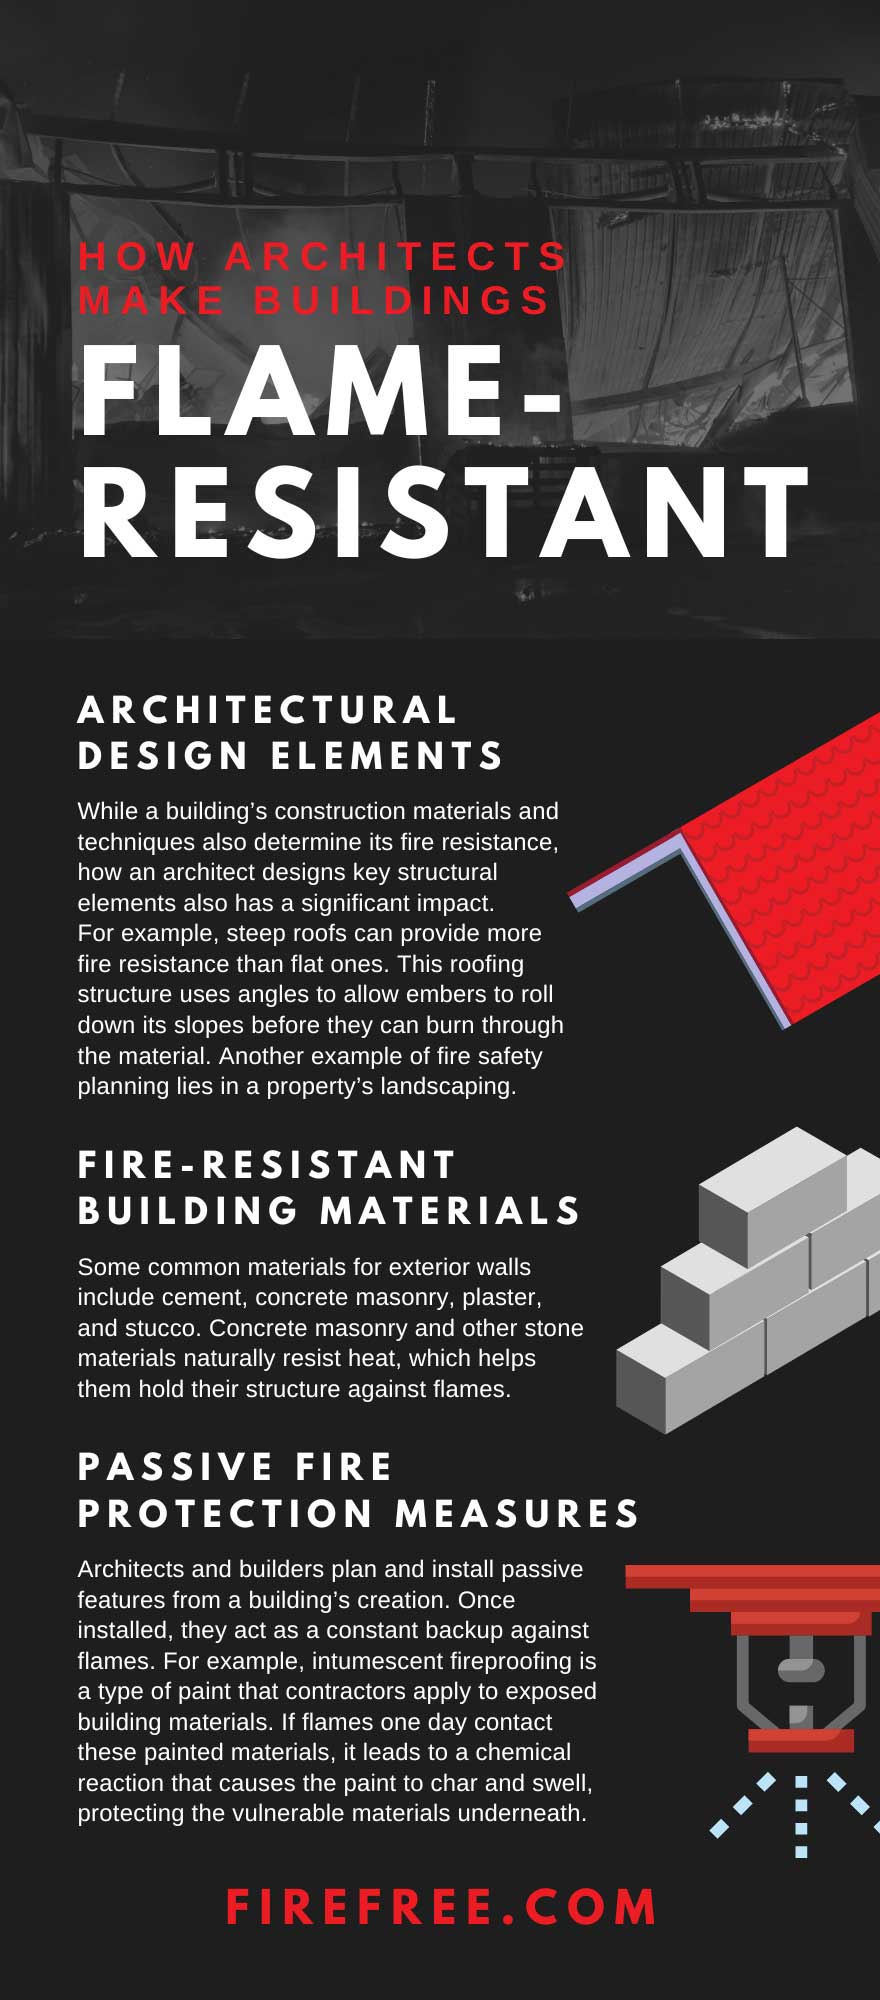 How Architects Make Buildings Flame-Resistant